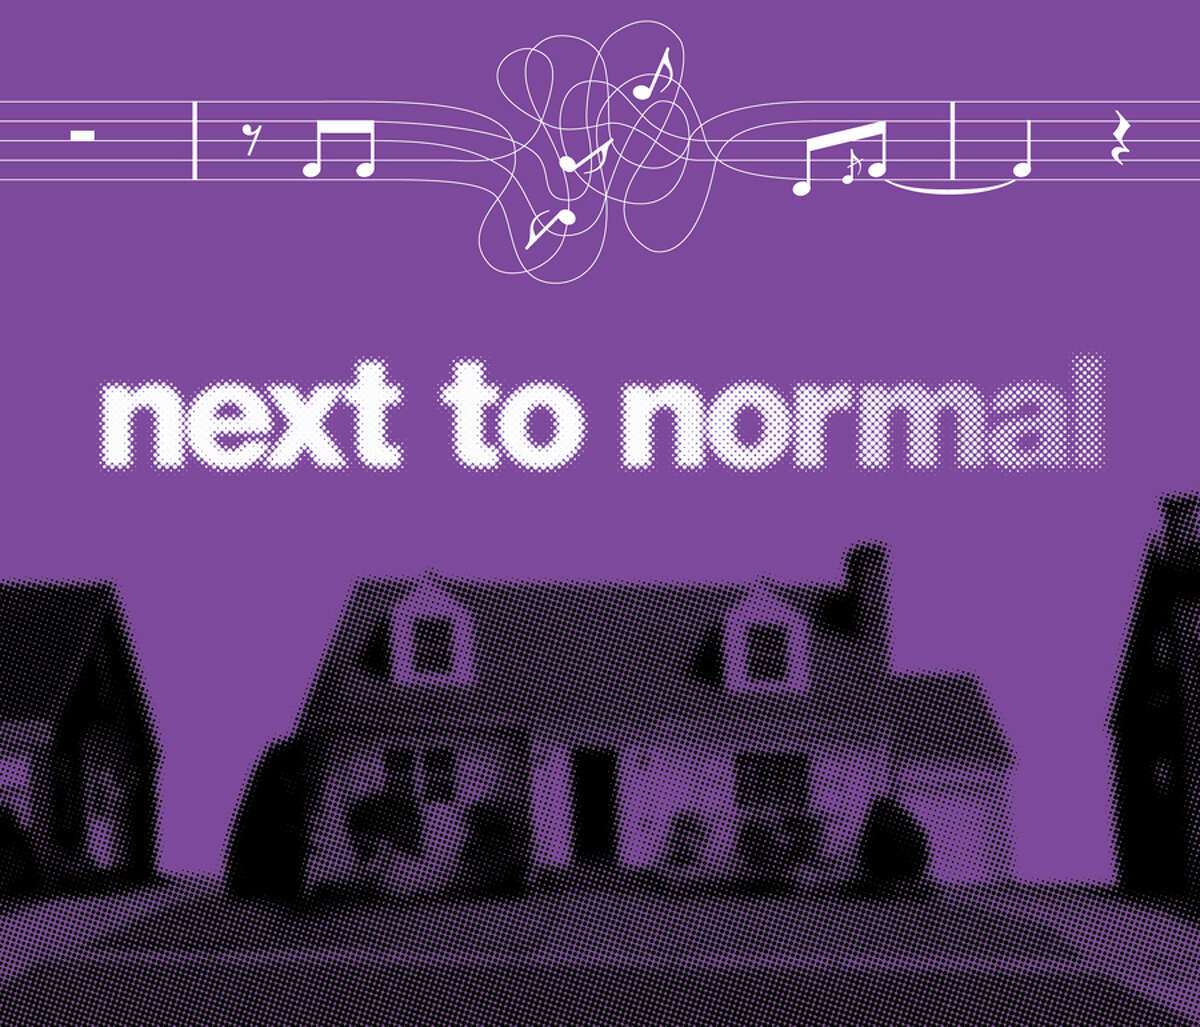 The Ridgefield Theater Barn will hold open auditions for "Next to Normal" on Feb. 26 and Feb. 28 at 7 p.m. at Ridgefield Guild of Artists.